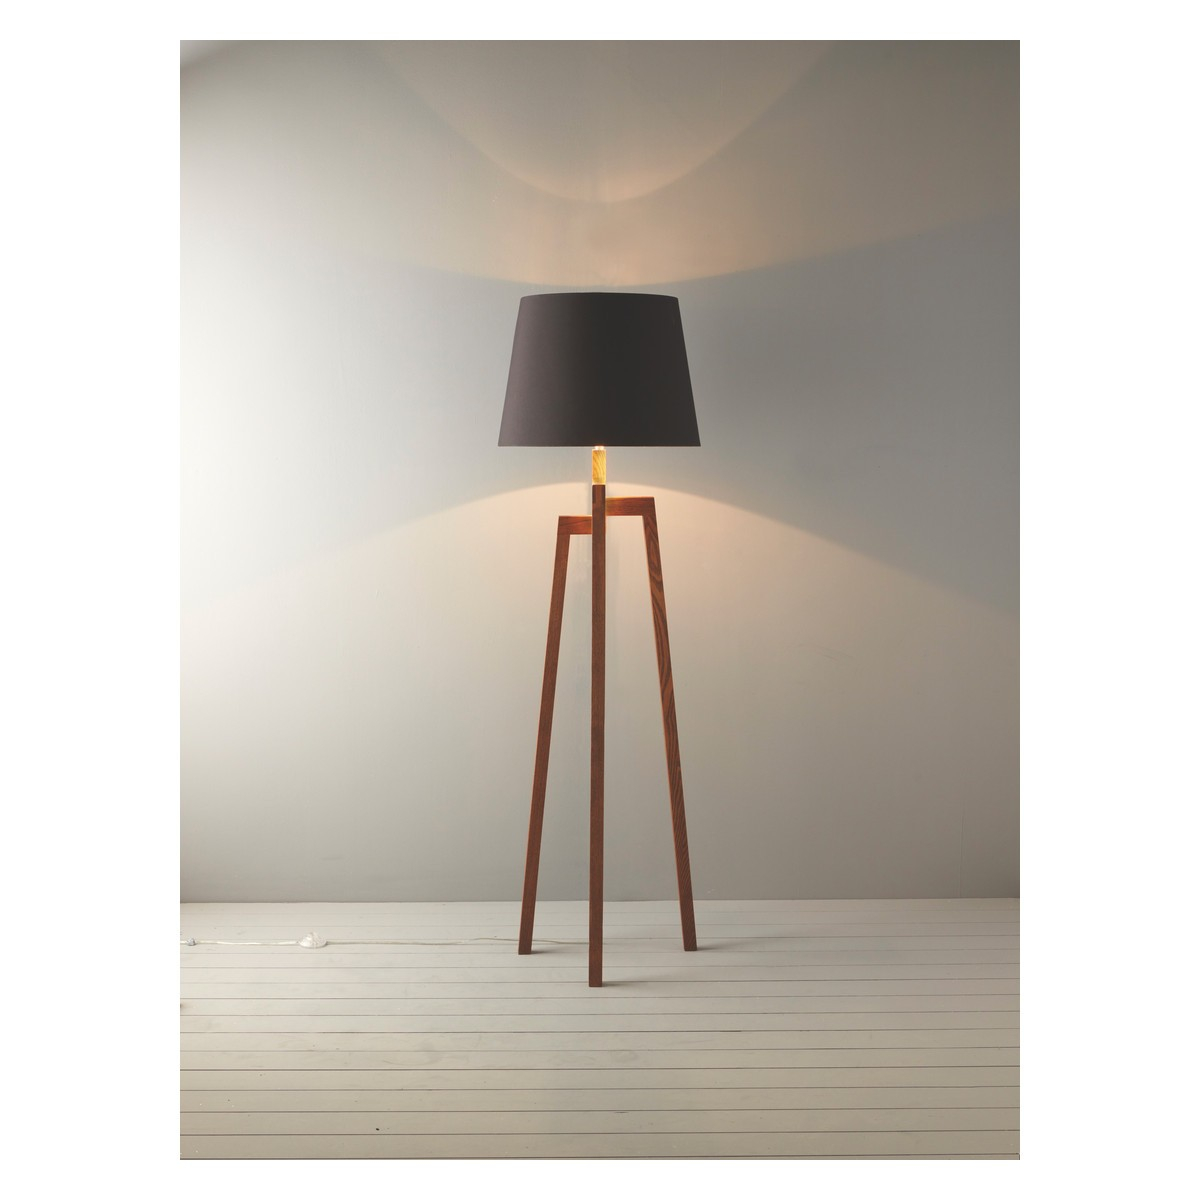 New Wooden Floor Lamp Uk Driftwood With Shade Rustic A for dimensions 1200 X 1200